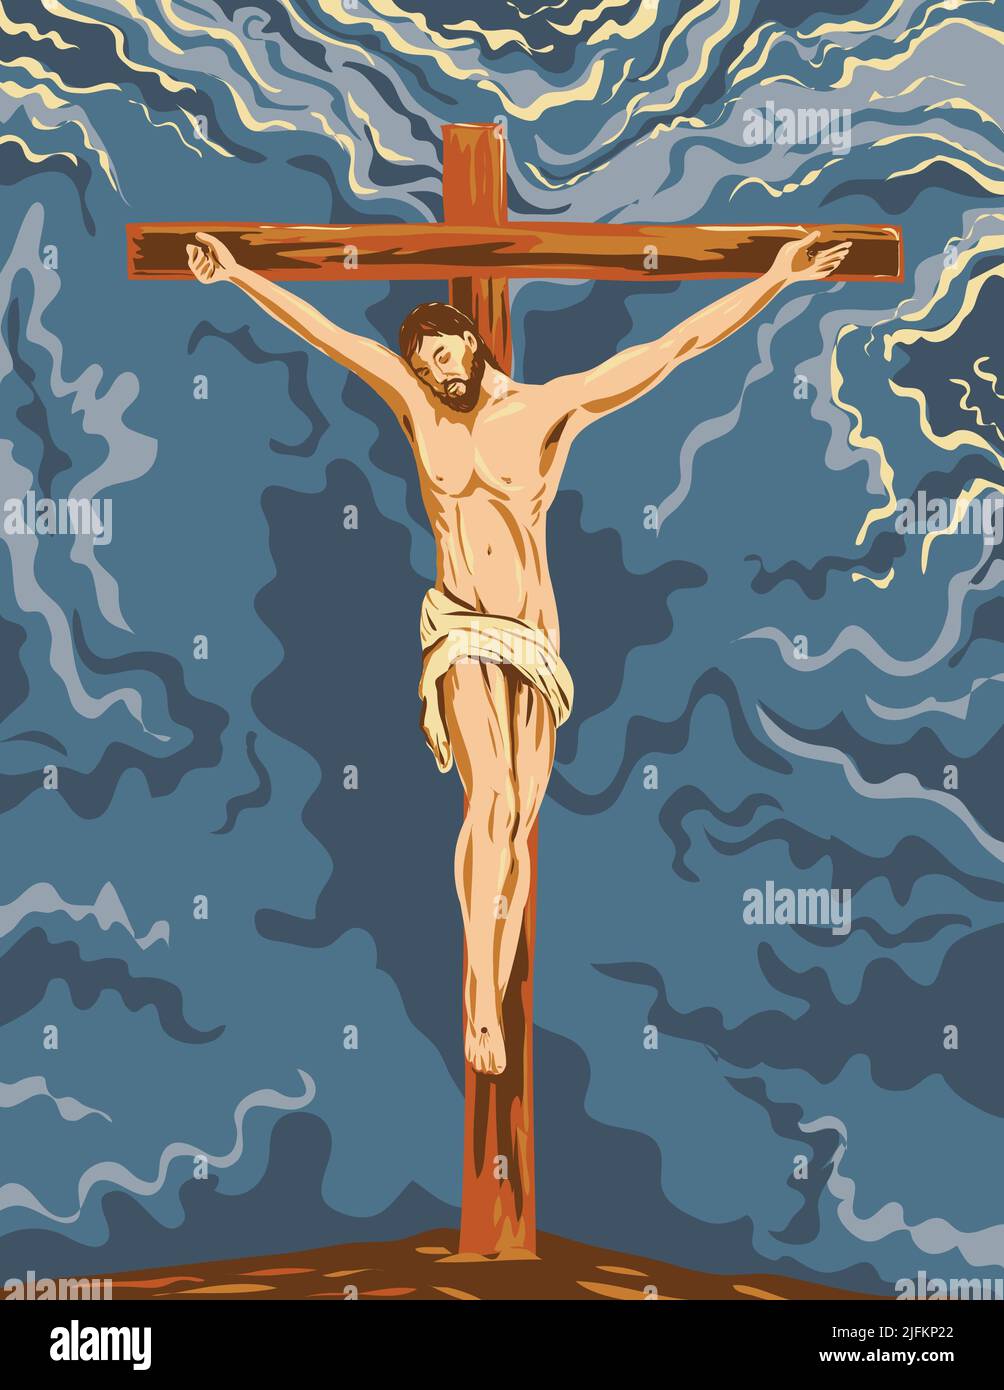 WPA poster art of the crucified Jesus Christ on the cross during his crucifixion done in works project administration or federal art project style. Stock Photo